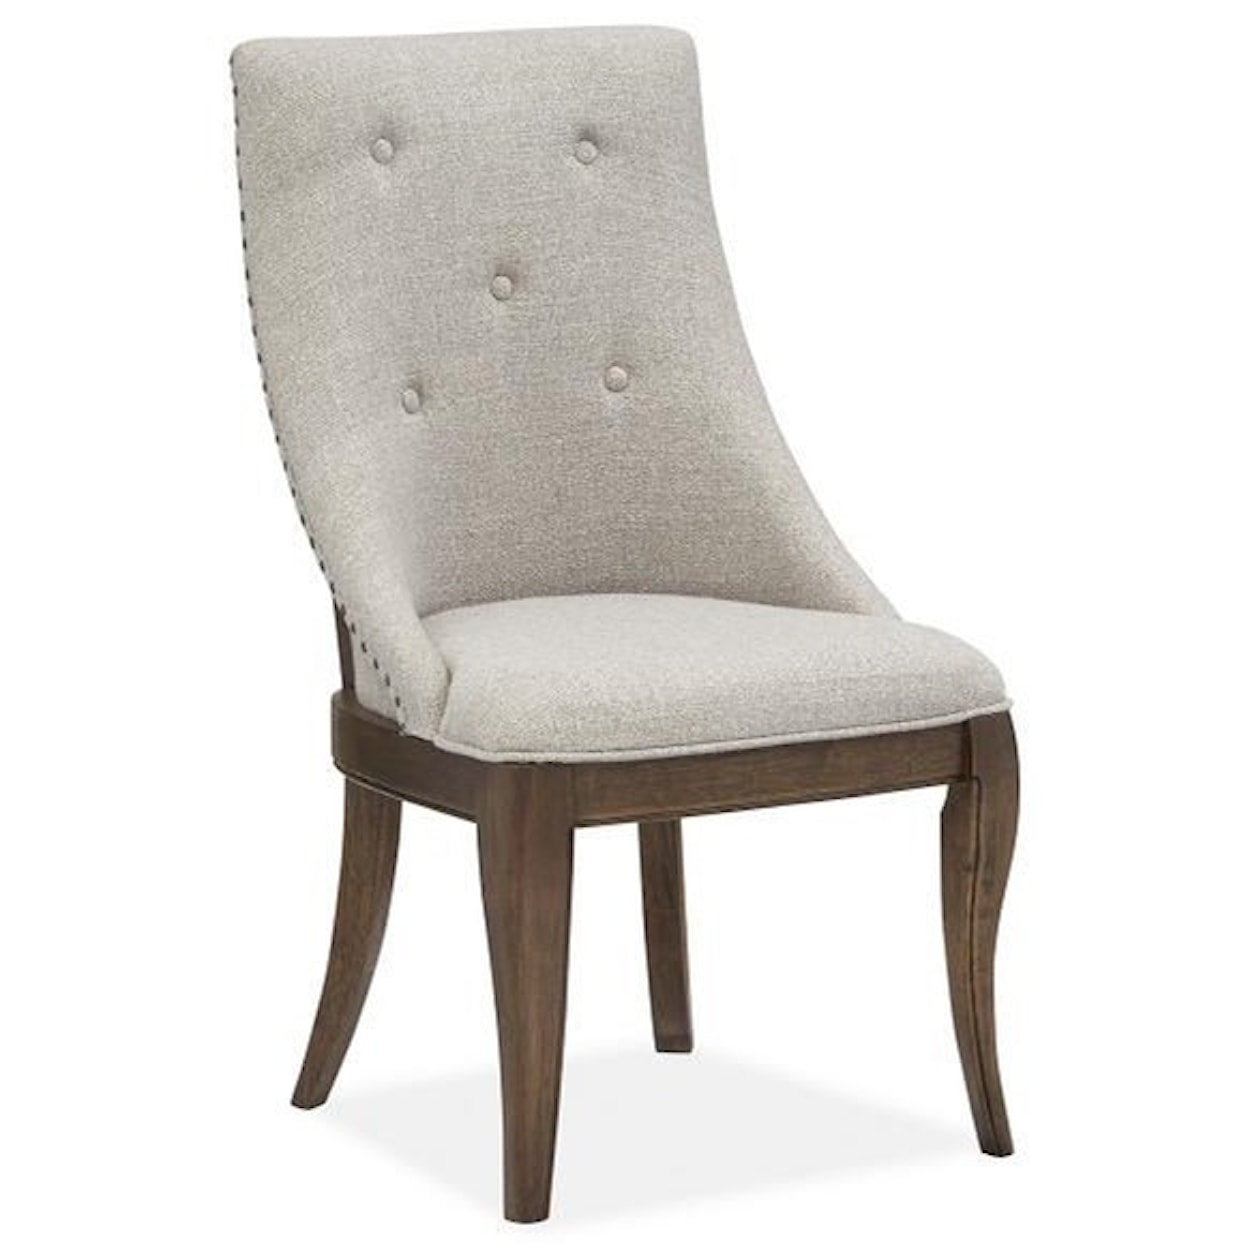 Belfort Select Withers Grove Dining Arm Chair